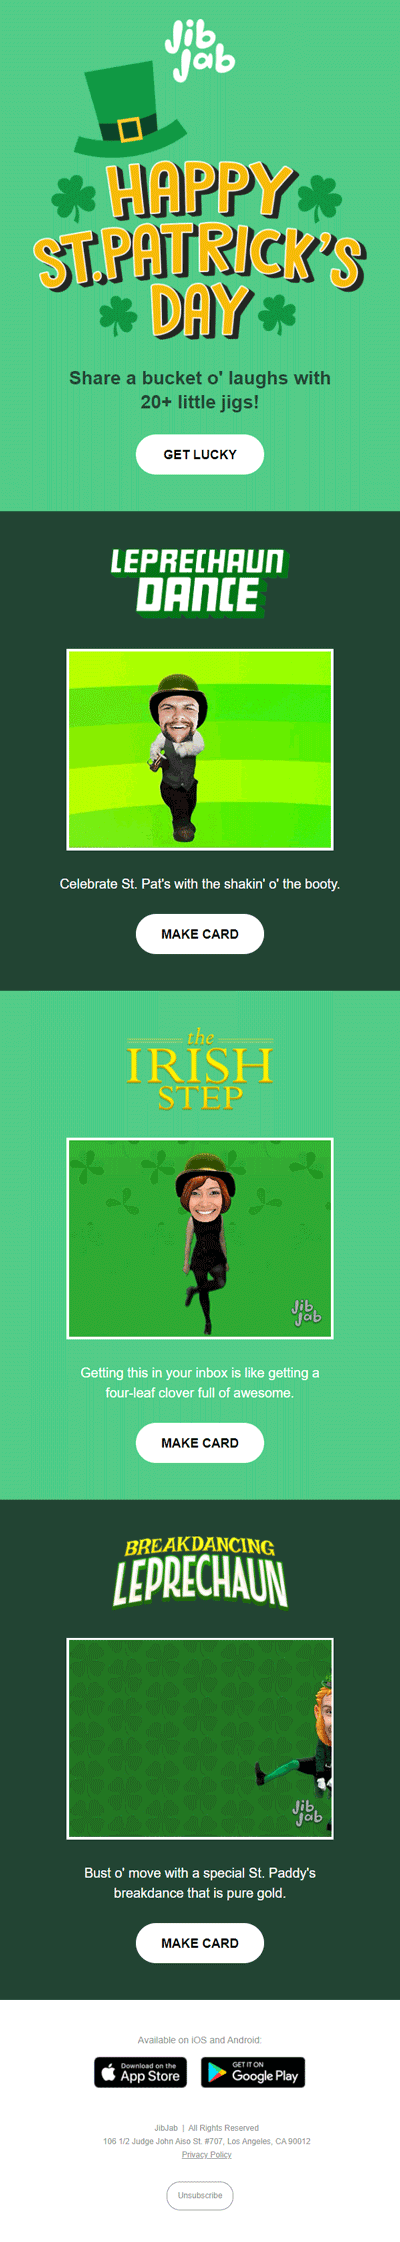 St Patrick's Day email from JibJab